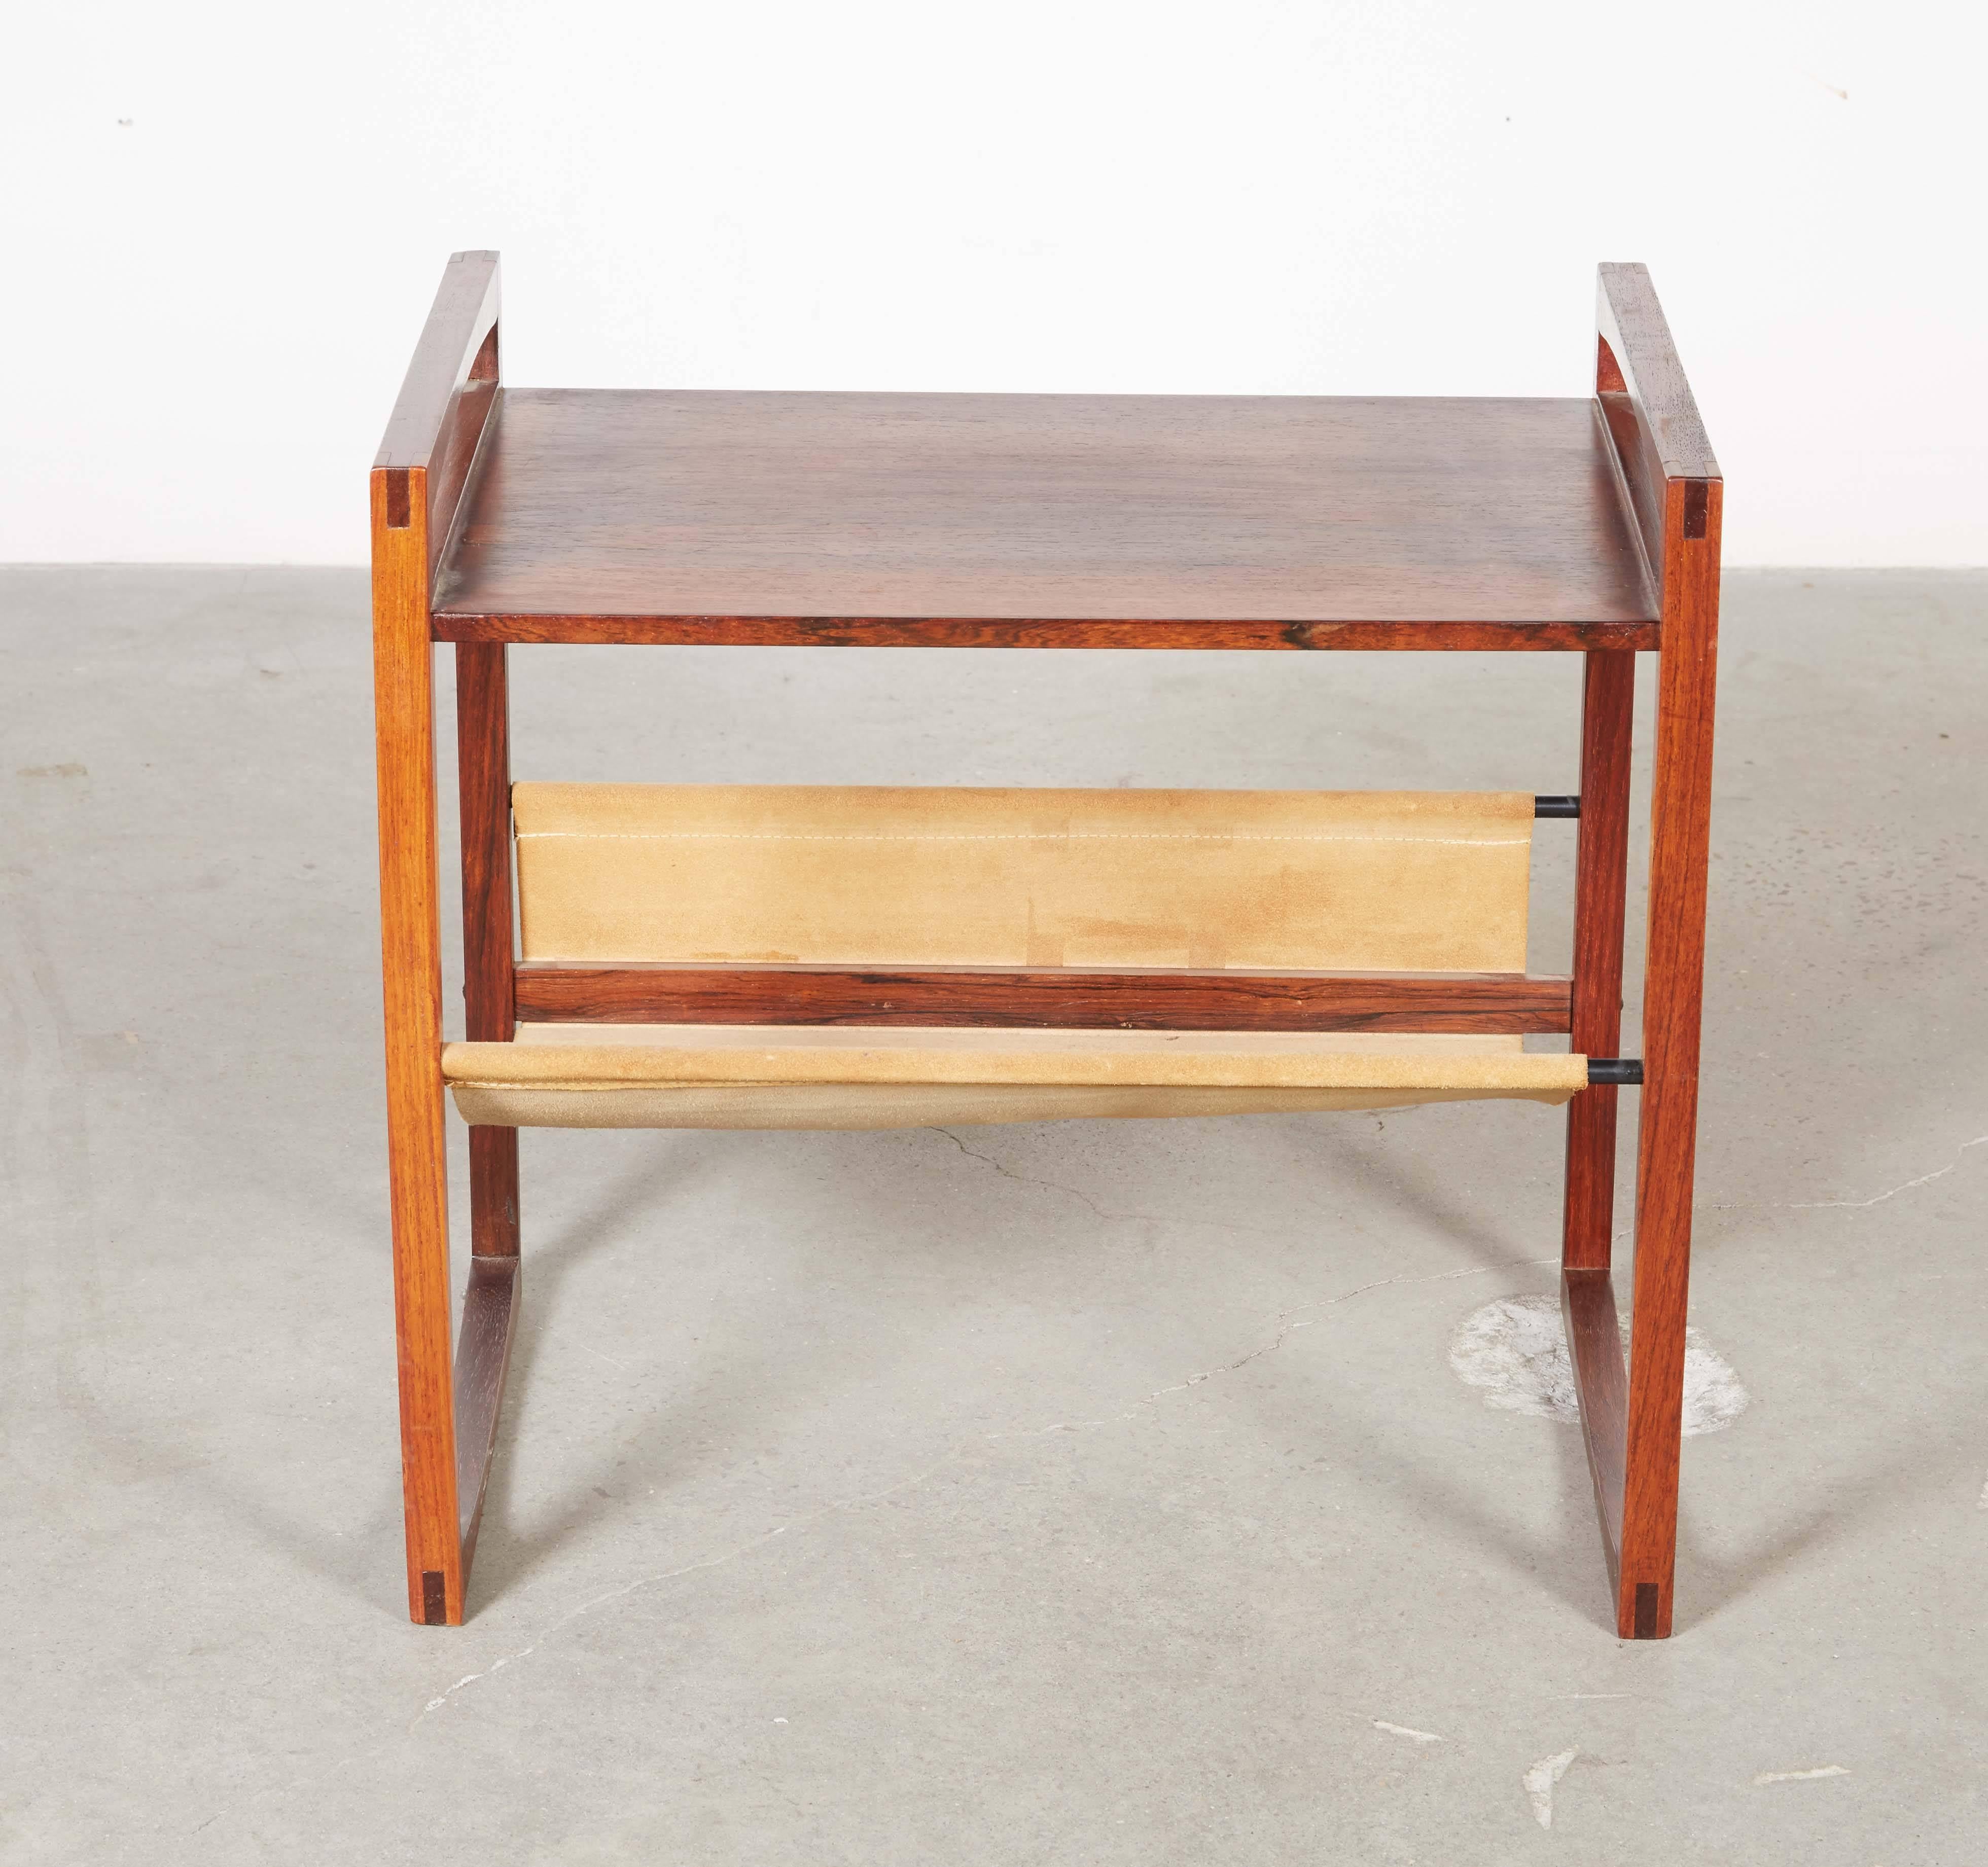 Mid Century 1960s Side Table / Magazine Rack

This Danish side table is in excellent condition. The rosewood version of this table is rare. Great for tiny spaces. Ready for pick up, delivery, or shipping anywhere in the world.